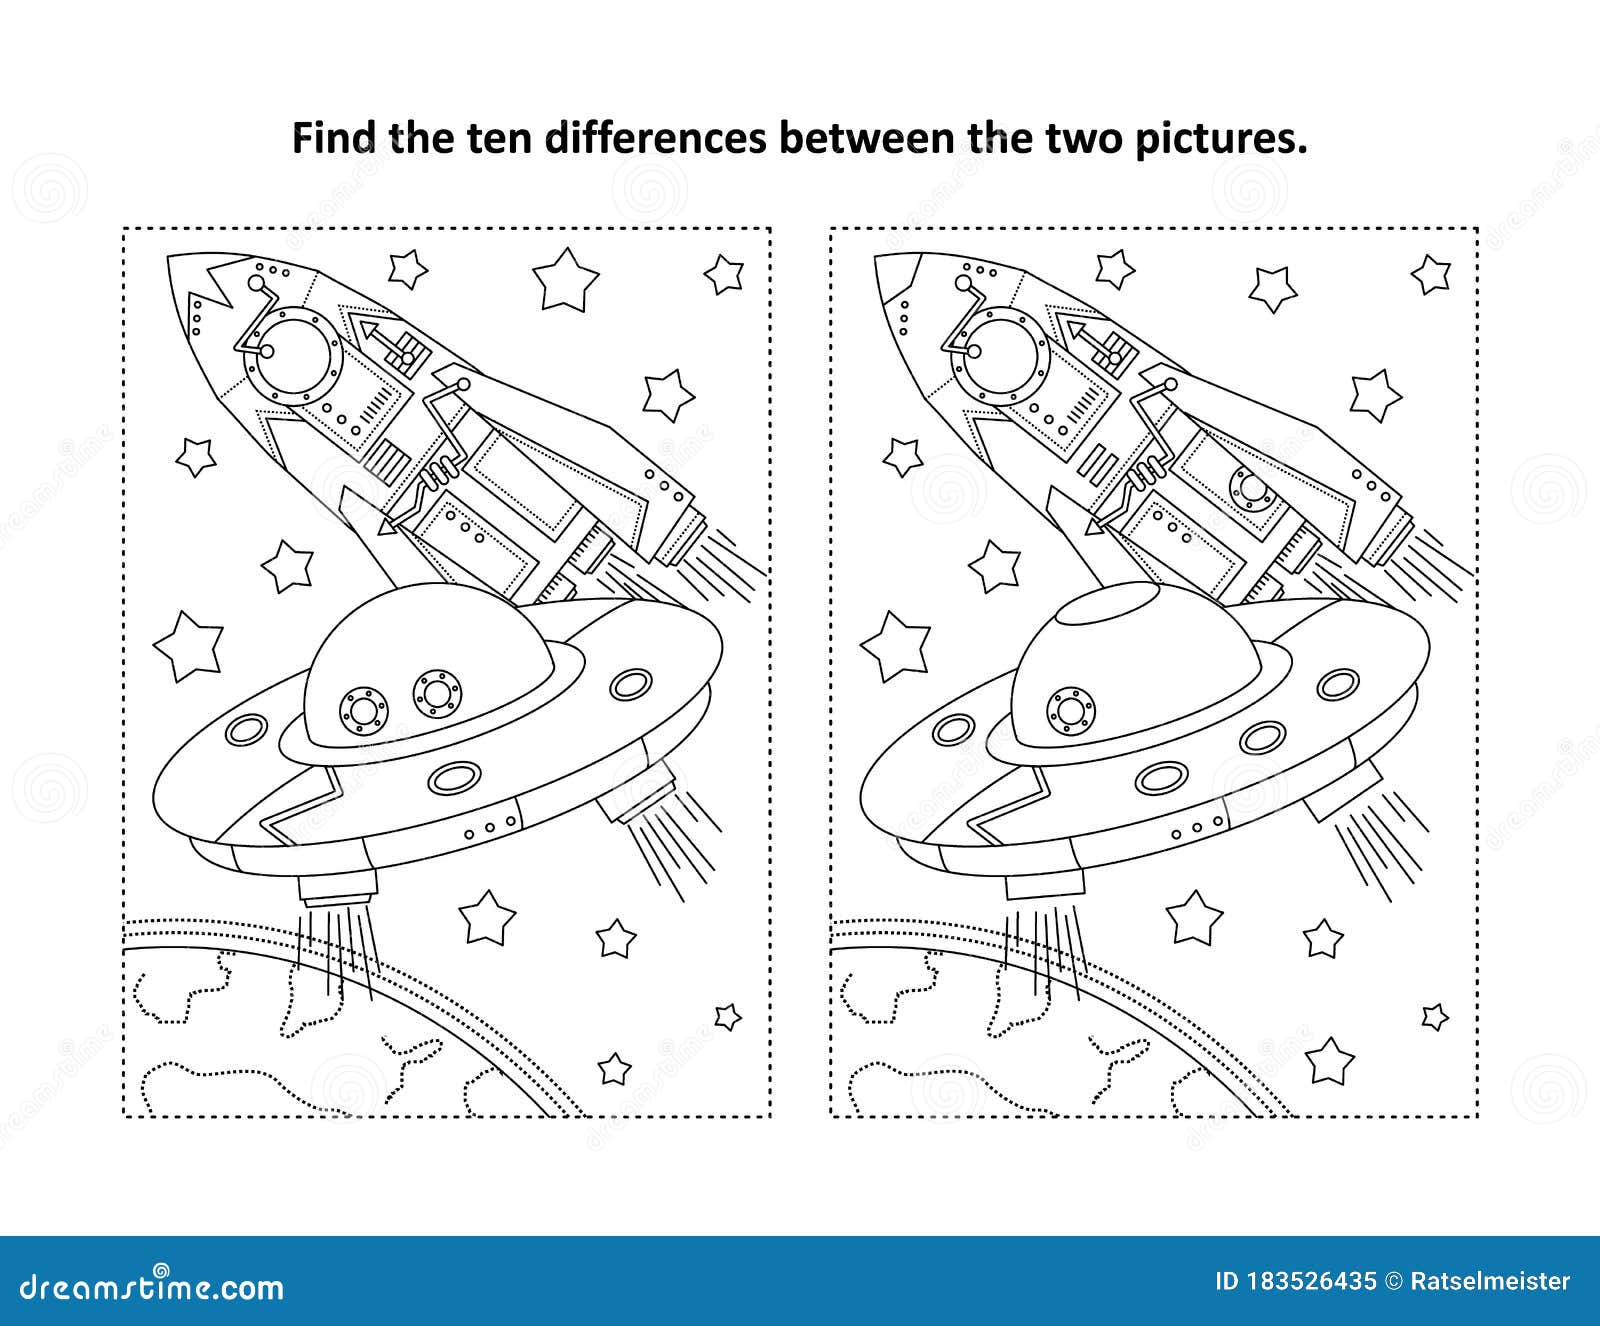 find the differences visual puzzle and coloring page with ufo, earth, spaceship